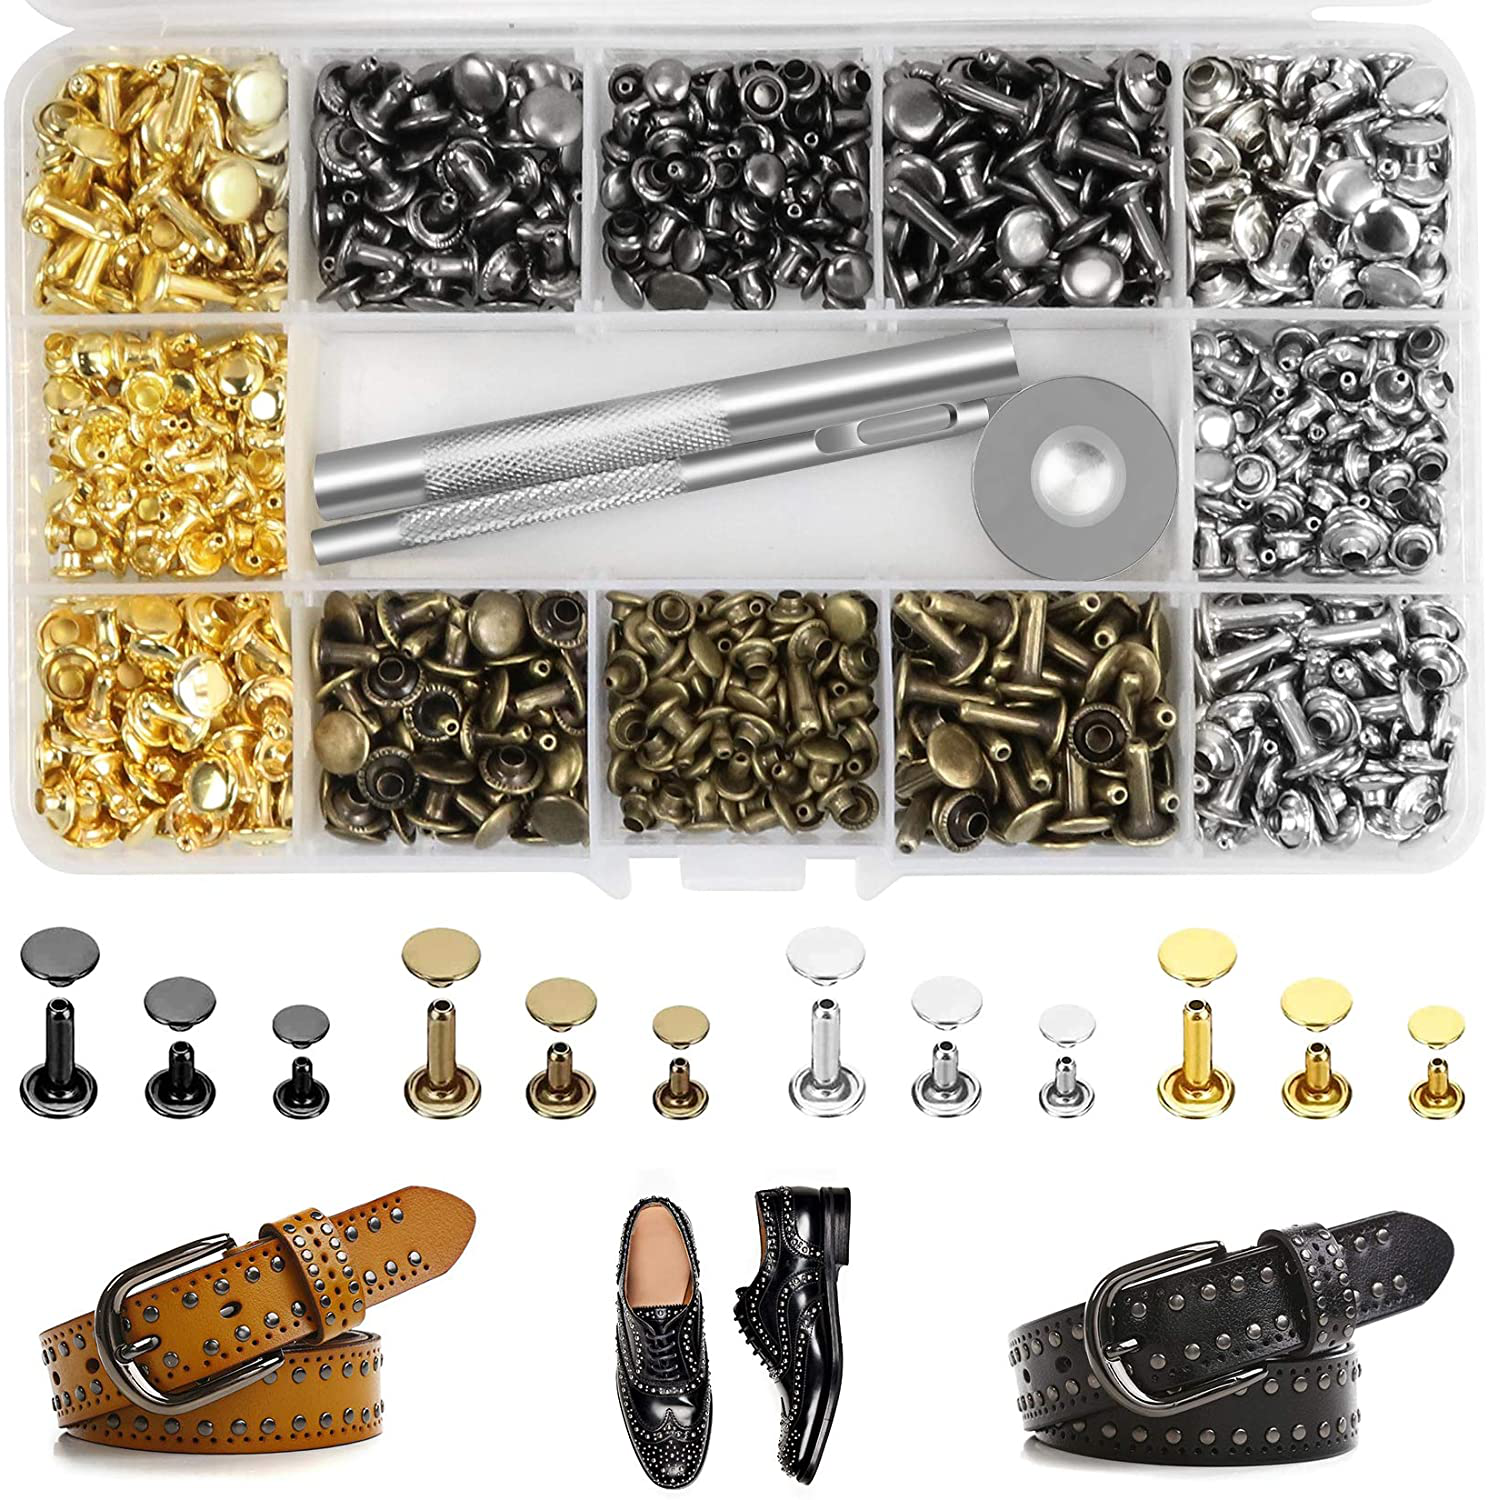 Jetmore 420 Sets Leather Rivets Kit, Double Cap Brass Rivets Leather Studs with 3pcs Setting Tools for Leather Repair and Crafts, 4 Colors and 3 Sizes